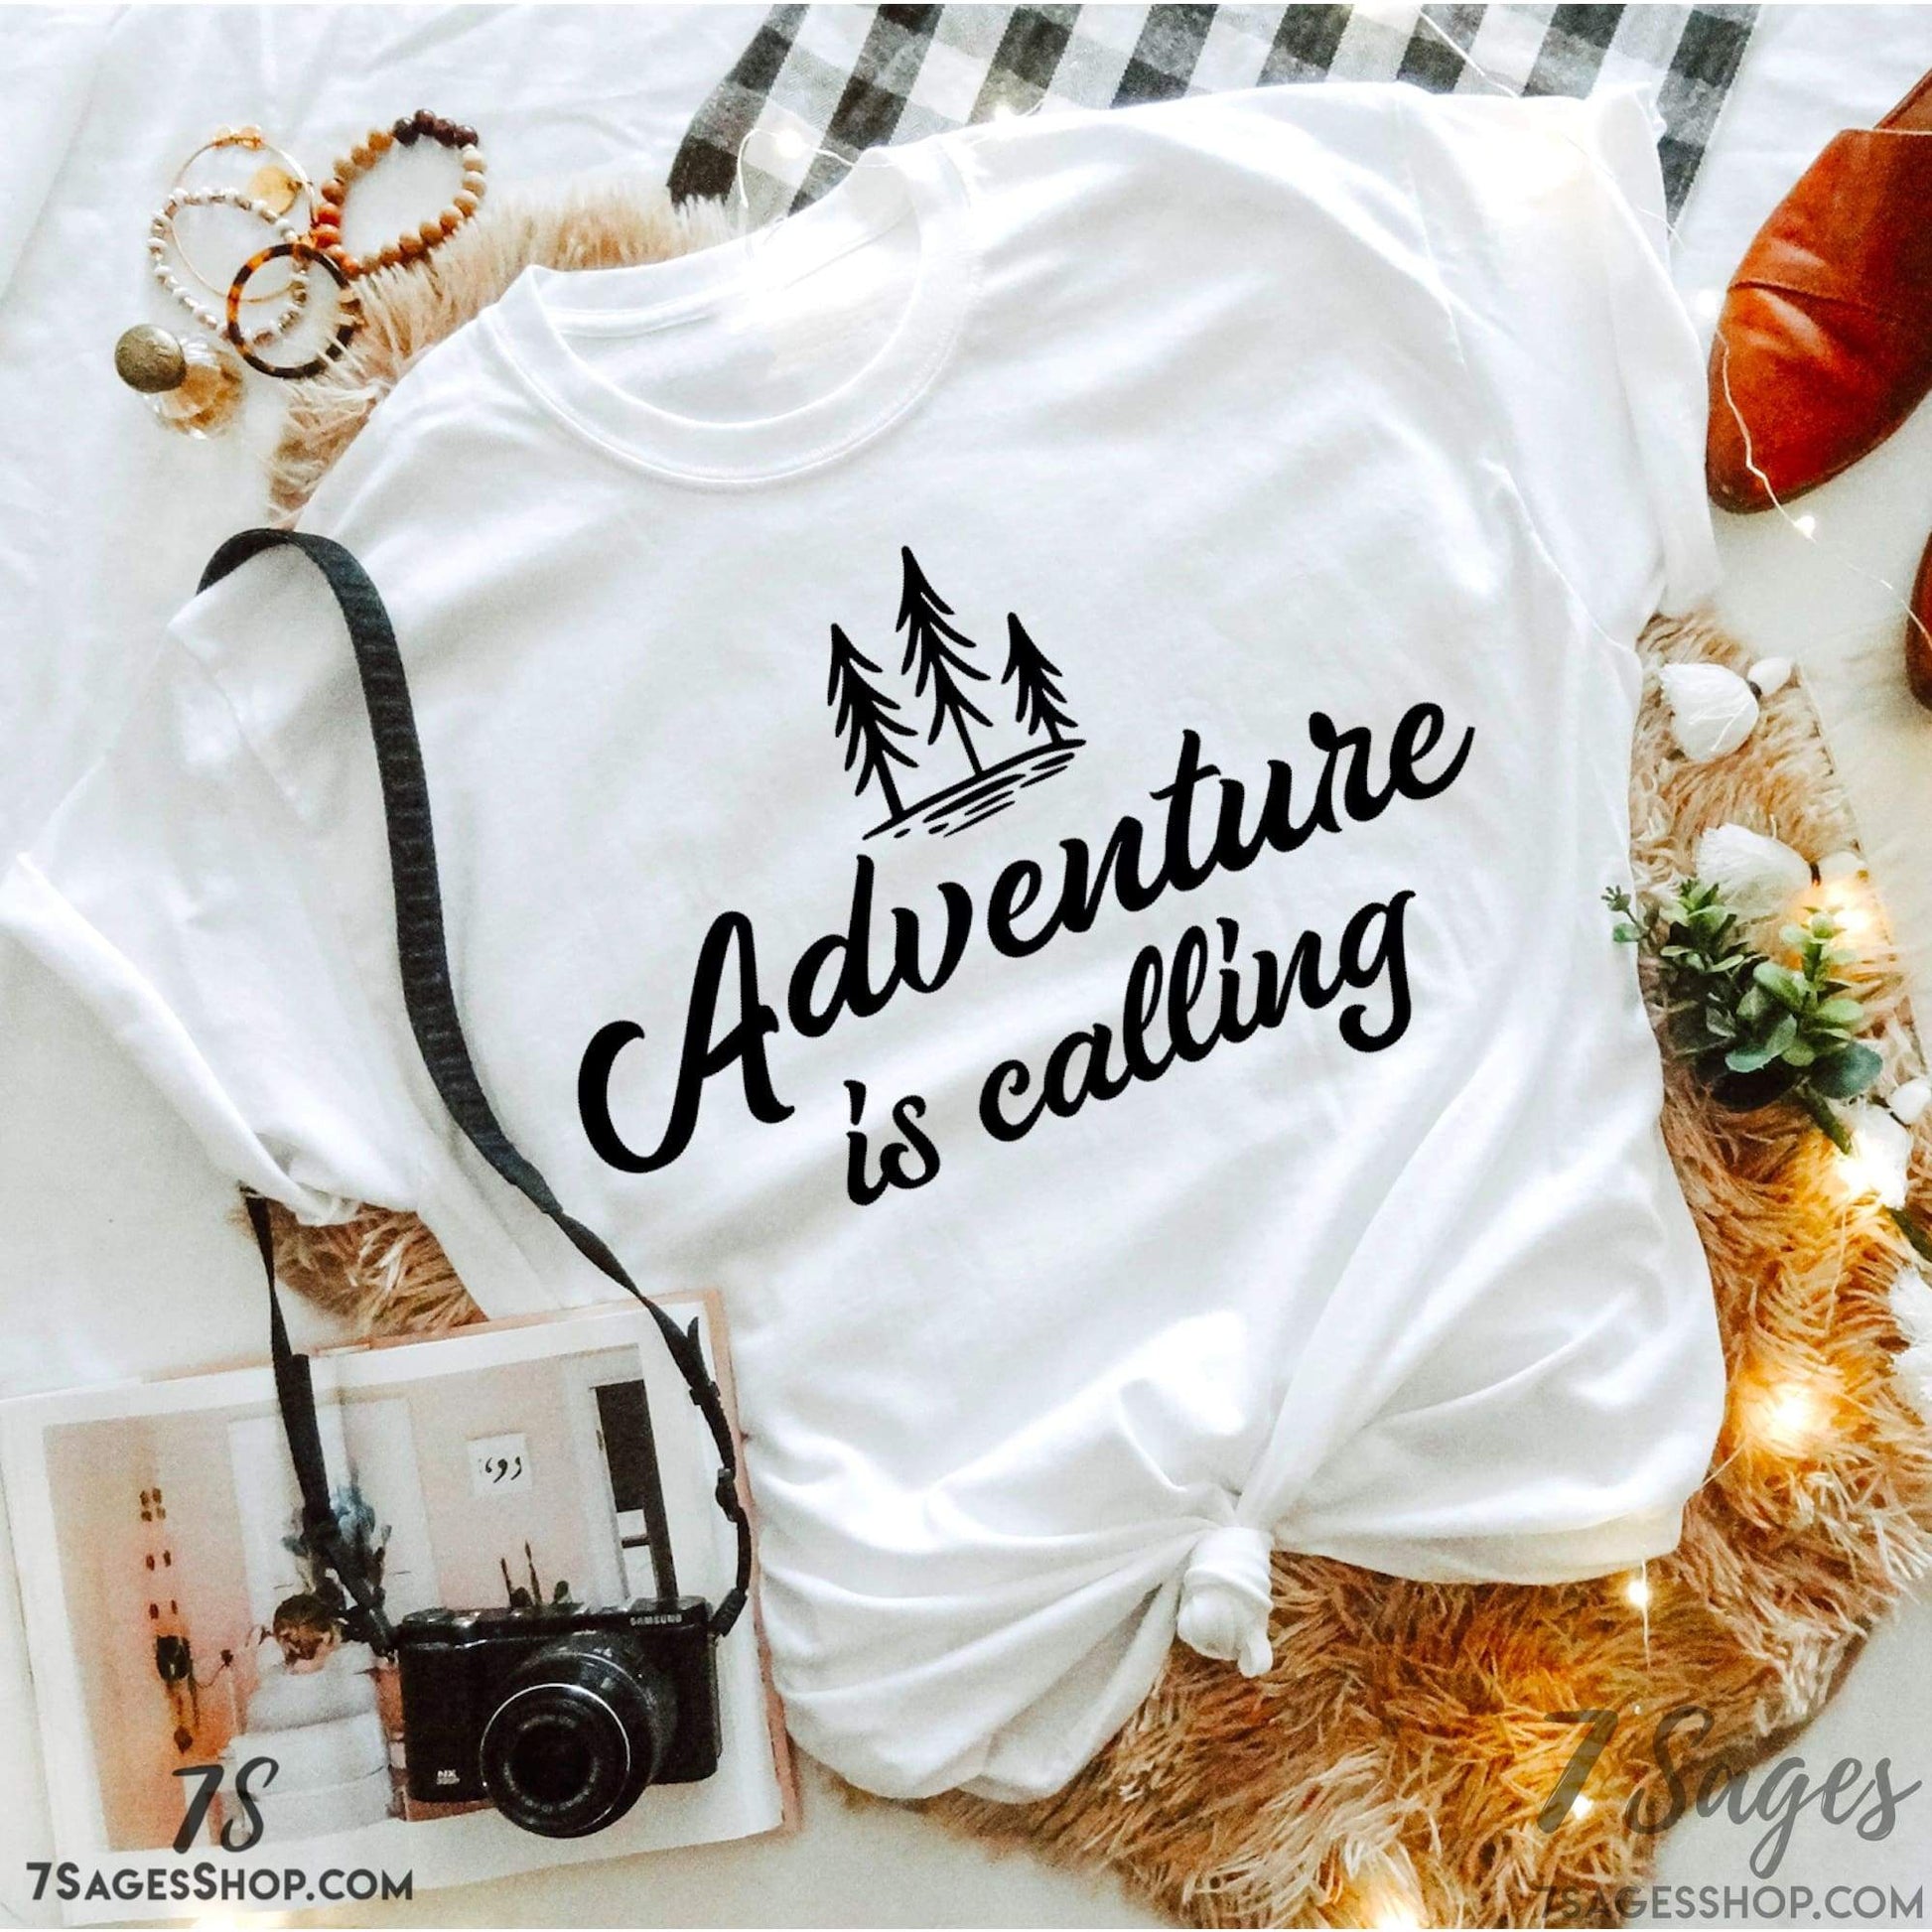 Adventure Is Calling Shirt - Camping Shirt - Explore Shirts - Camping Gift - Travel Shirt - Gift for Travelers - Gift for Campers